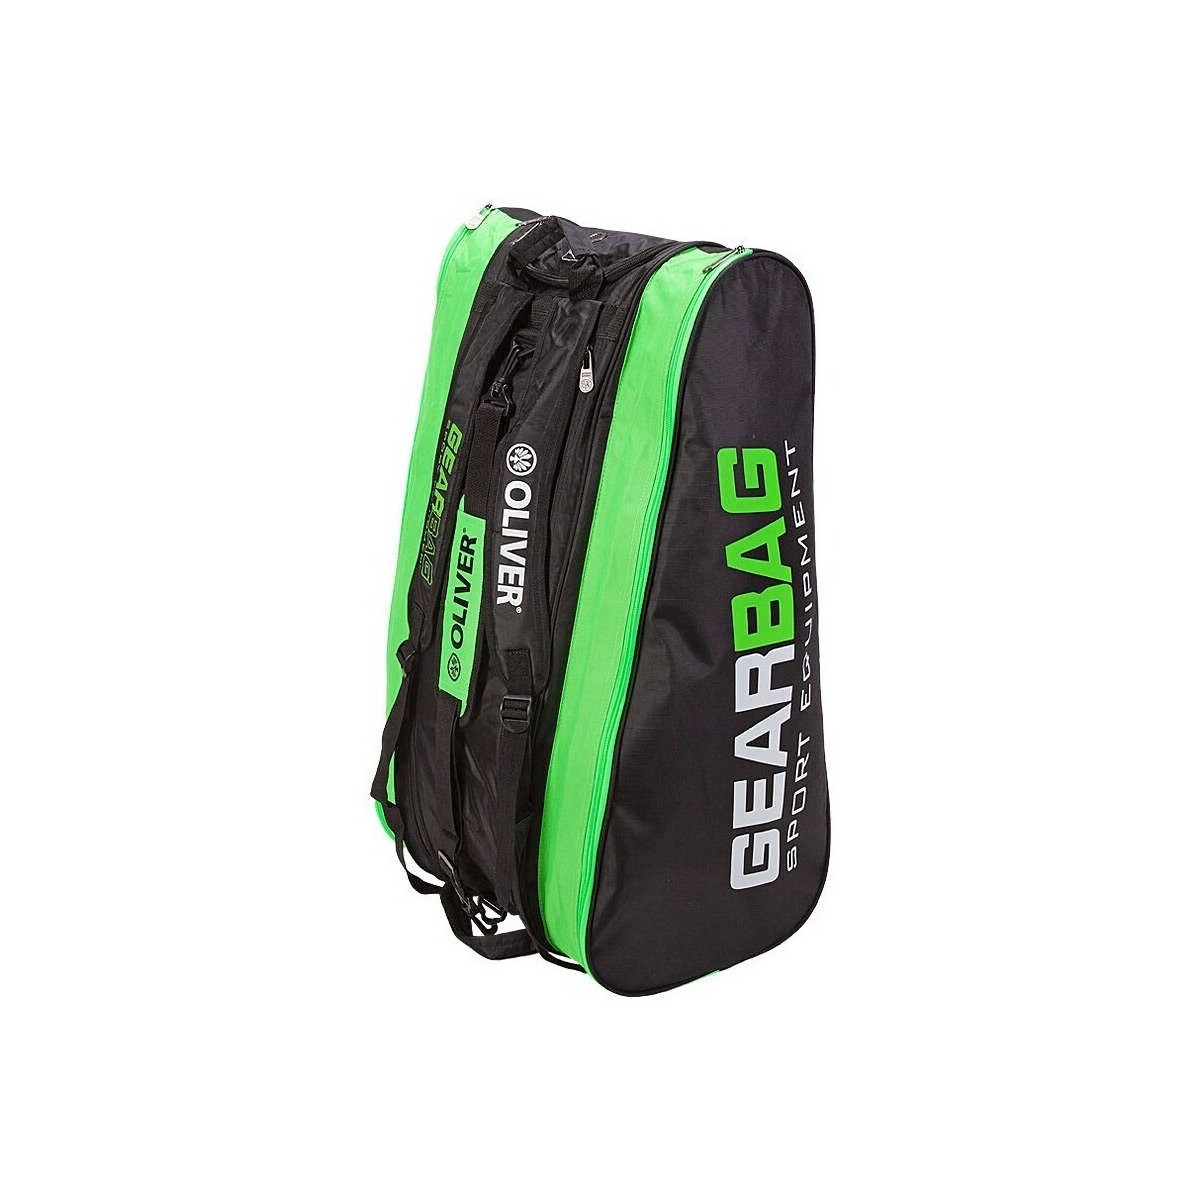 Genti Genti sport Oliver Thermobag Gearbag Negre, Verde